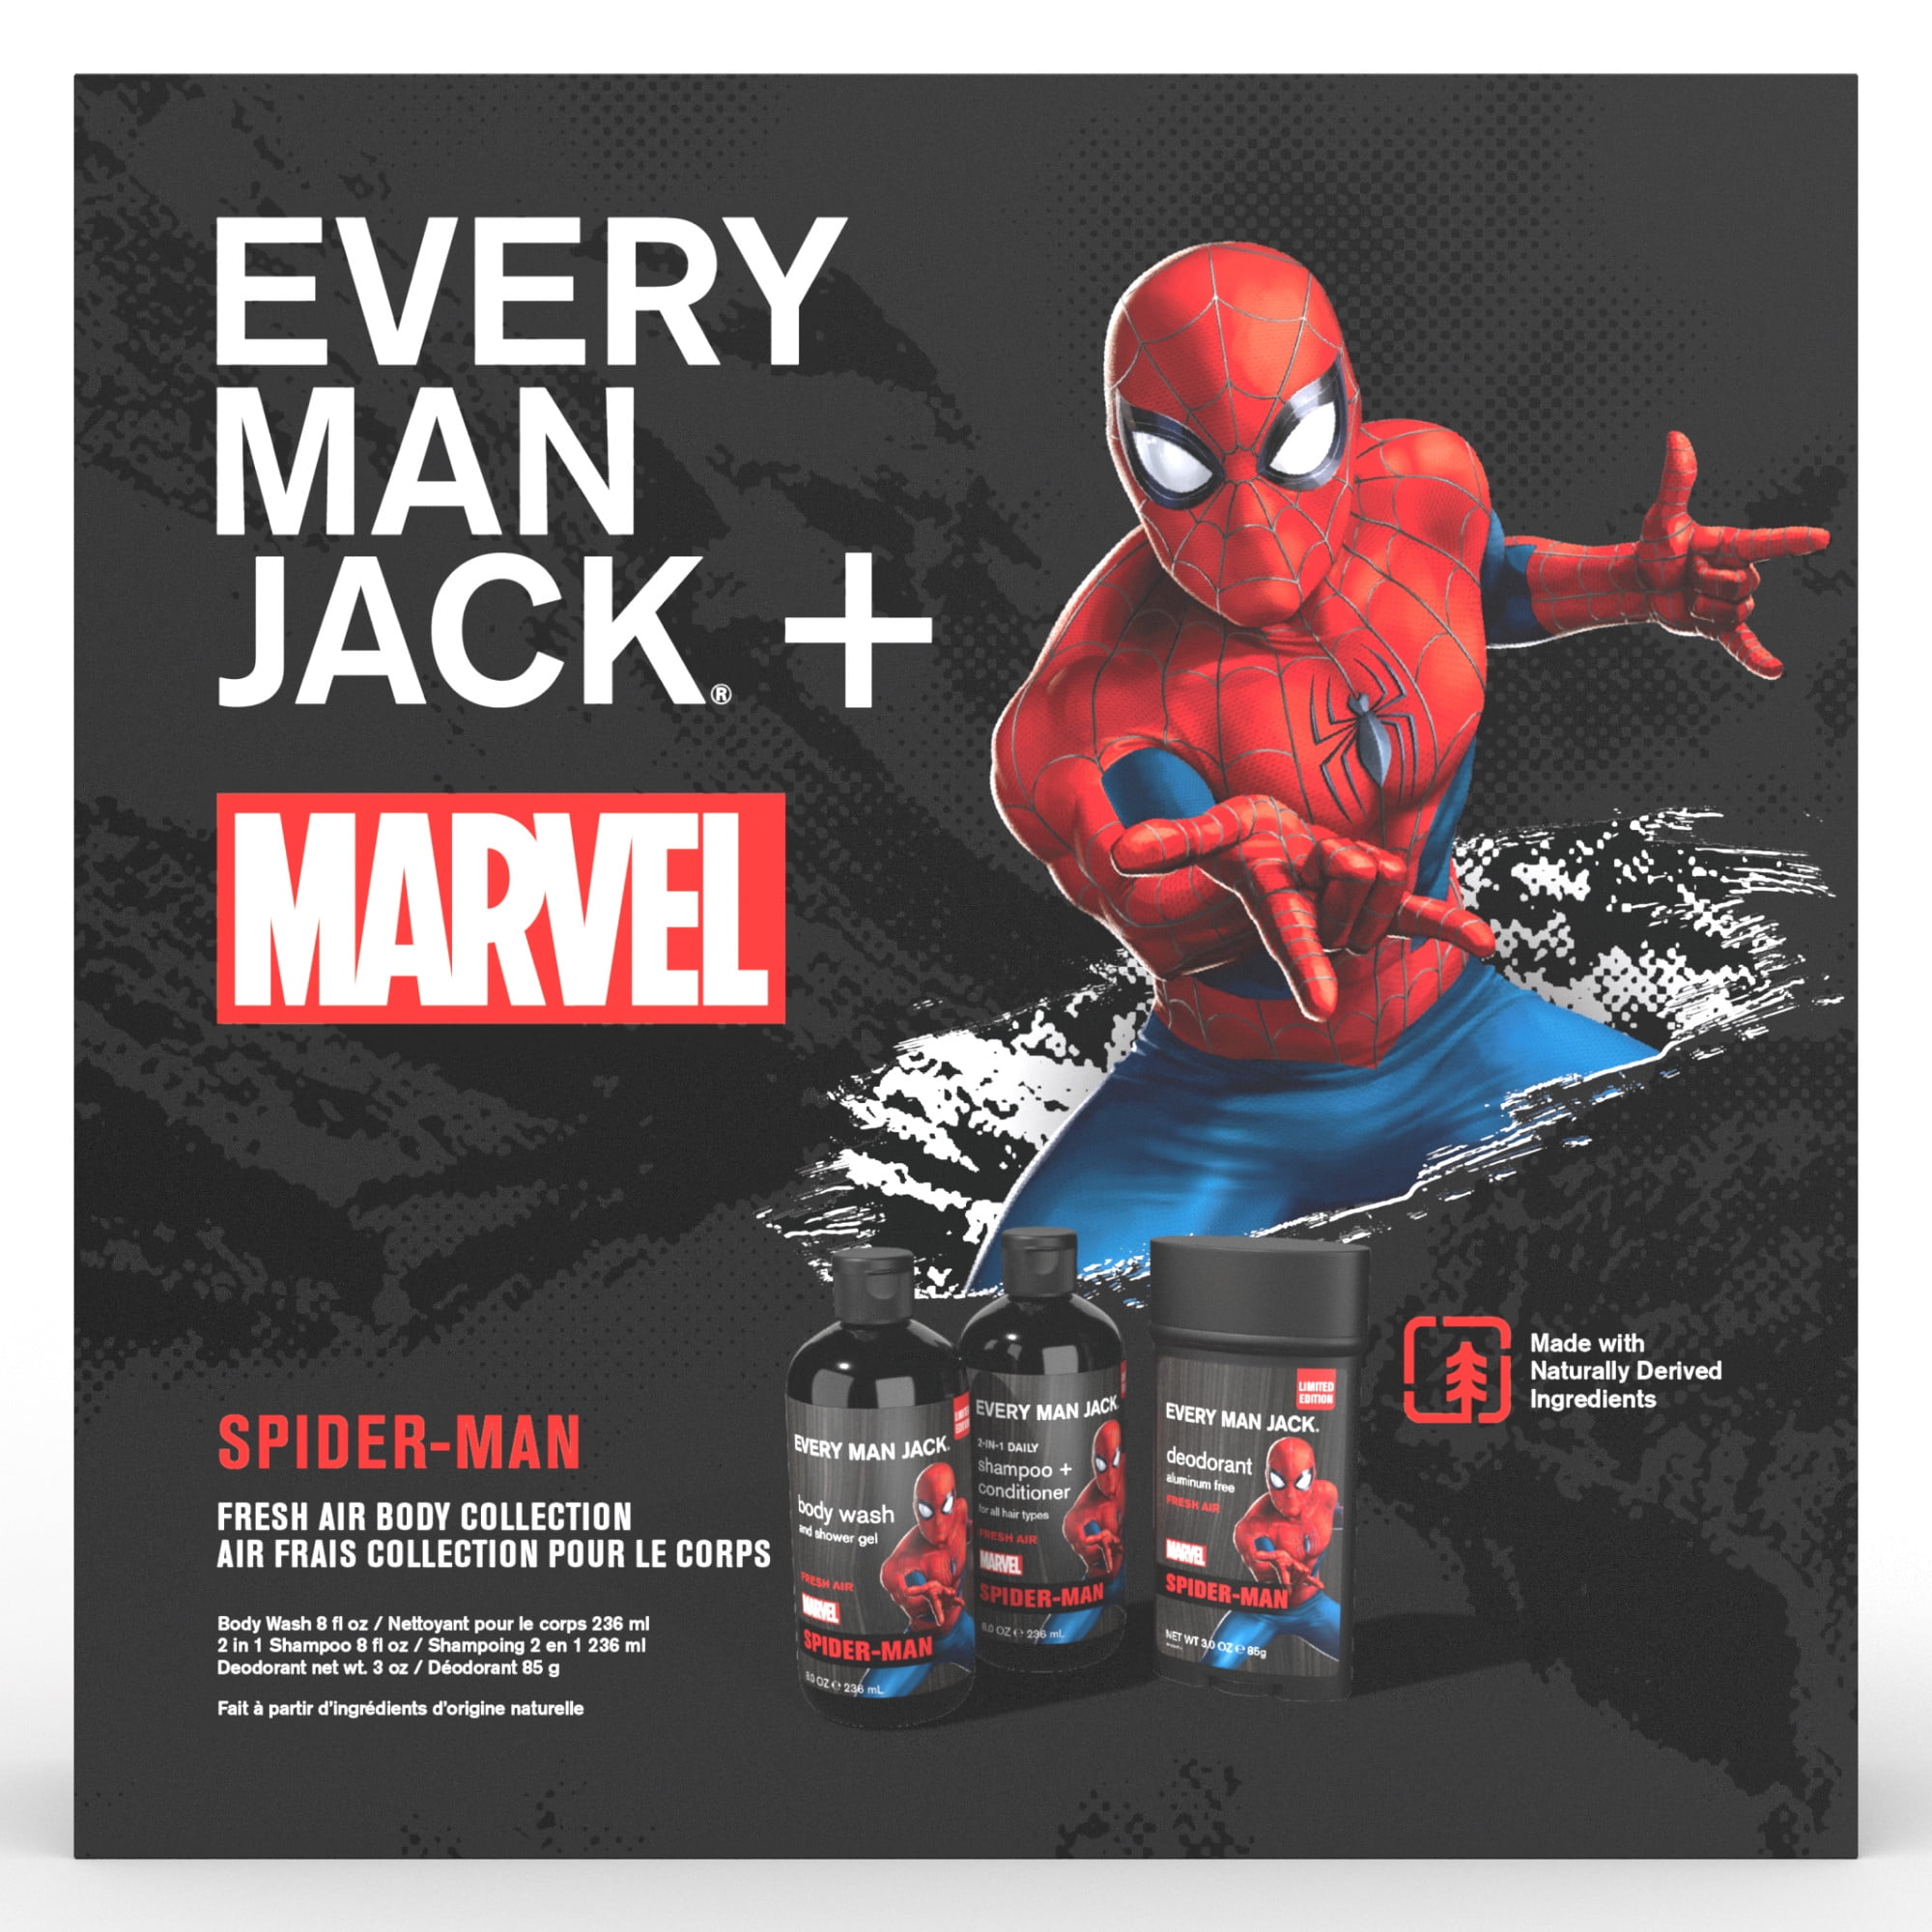 Every Man Jack Spiderman Bath and Body Holiday Gift Set for Men Body Wash Shampoo and Deodorant 73c0fc16 1c11 4c36 af8a 070564501adb.693f73a1baccd3c550838df11efe05ad